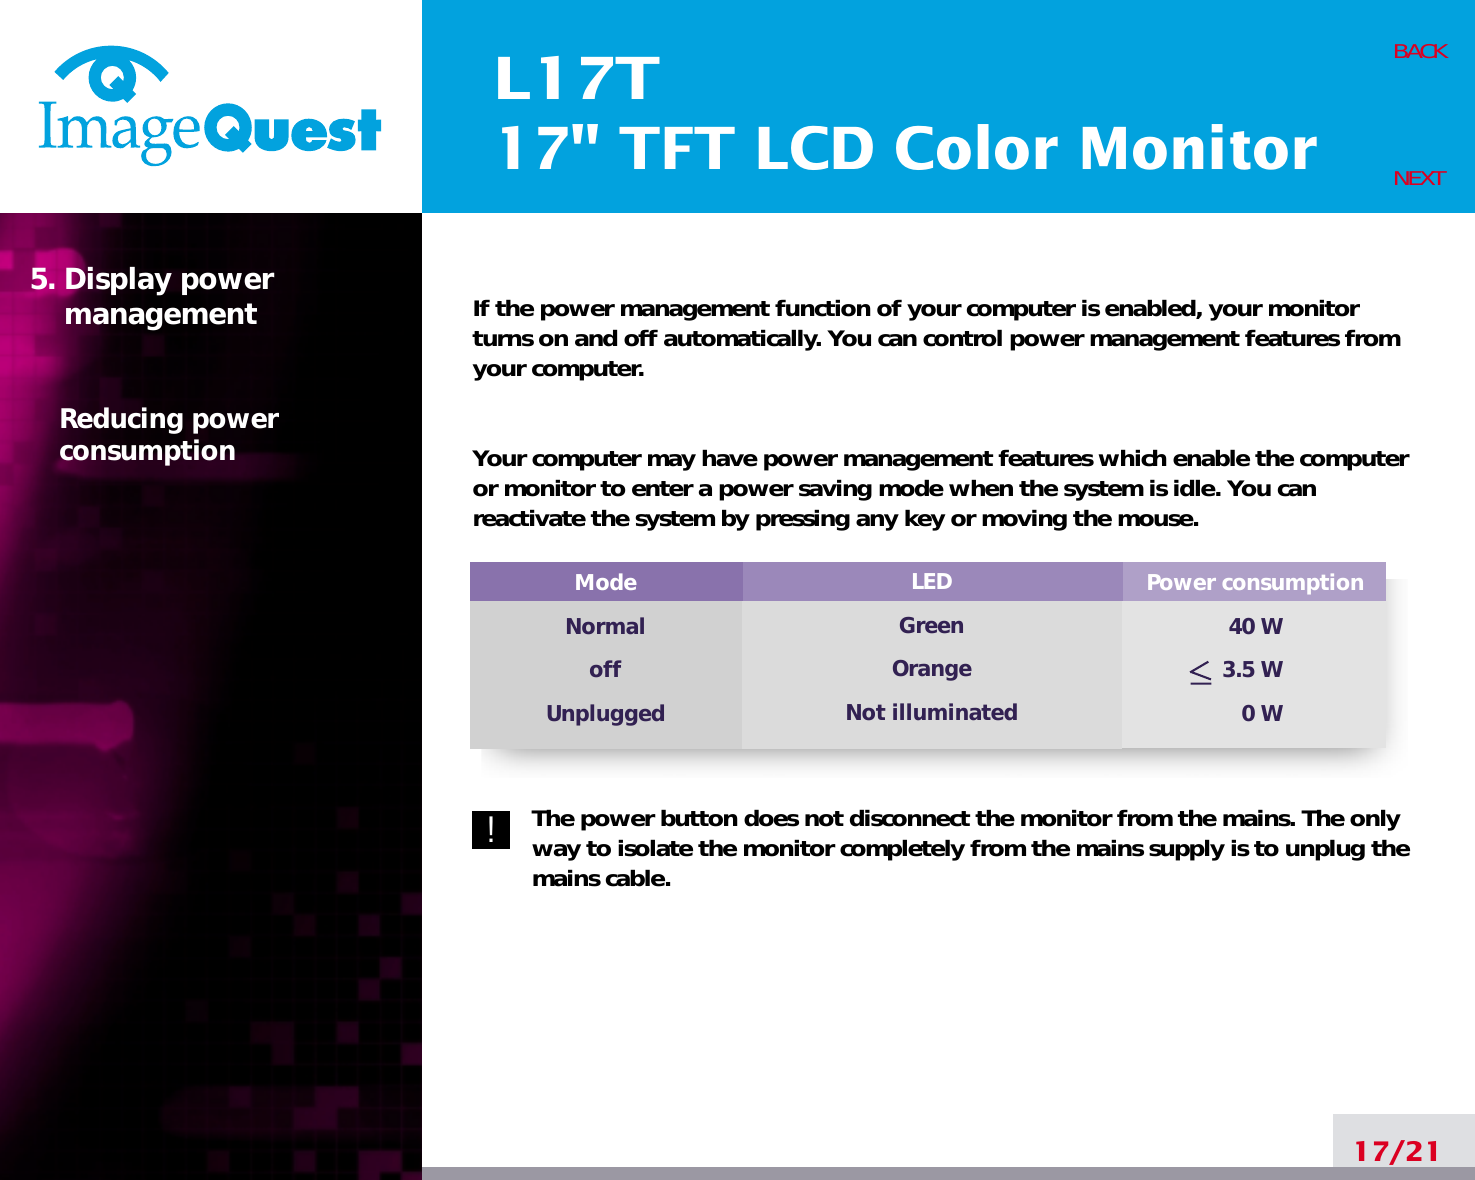 L17T17&quot; TFT LCD Color MonitorIf the power management function of your computer is enabled, your monitorturns on and off automatically. You can control power management features fromyour computer.Your computer may have power management features which enable the computeror monitor to enter a power saving mode when the system is idle. You canreactivate the system by pressing any key or moving the mouse.The power button does not disconnect the monitor from the mains. The onlyway to isolate the monitor completely from the mains supply is to unplug themains cable.17/21BACKNEXT5. Display power managementReducing powerconsumptionPower consumption40 W3.5 W0 WModeNormaloffUnpluggedLEDGreenOrangeNot illuminated!